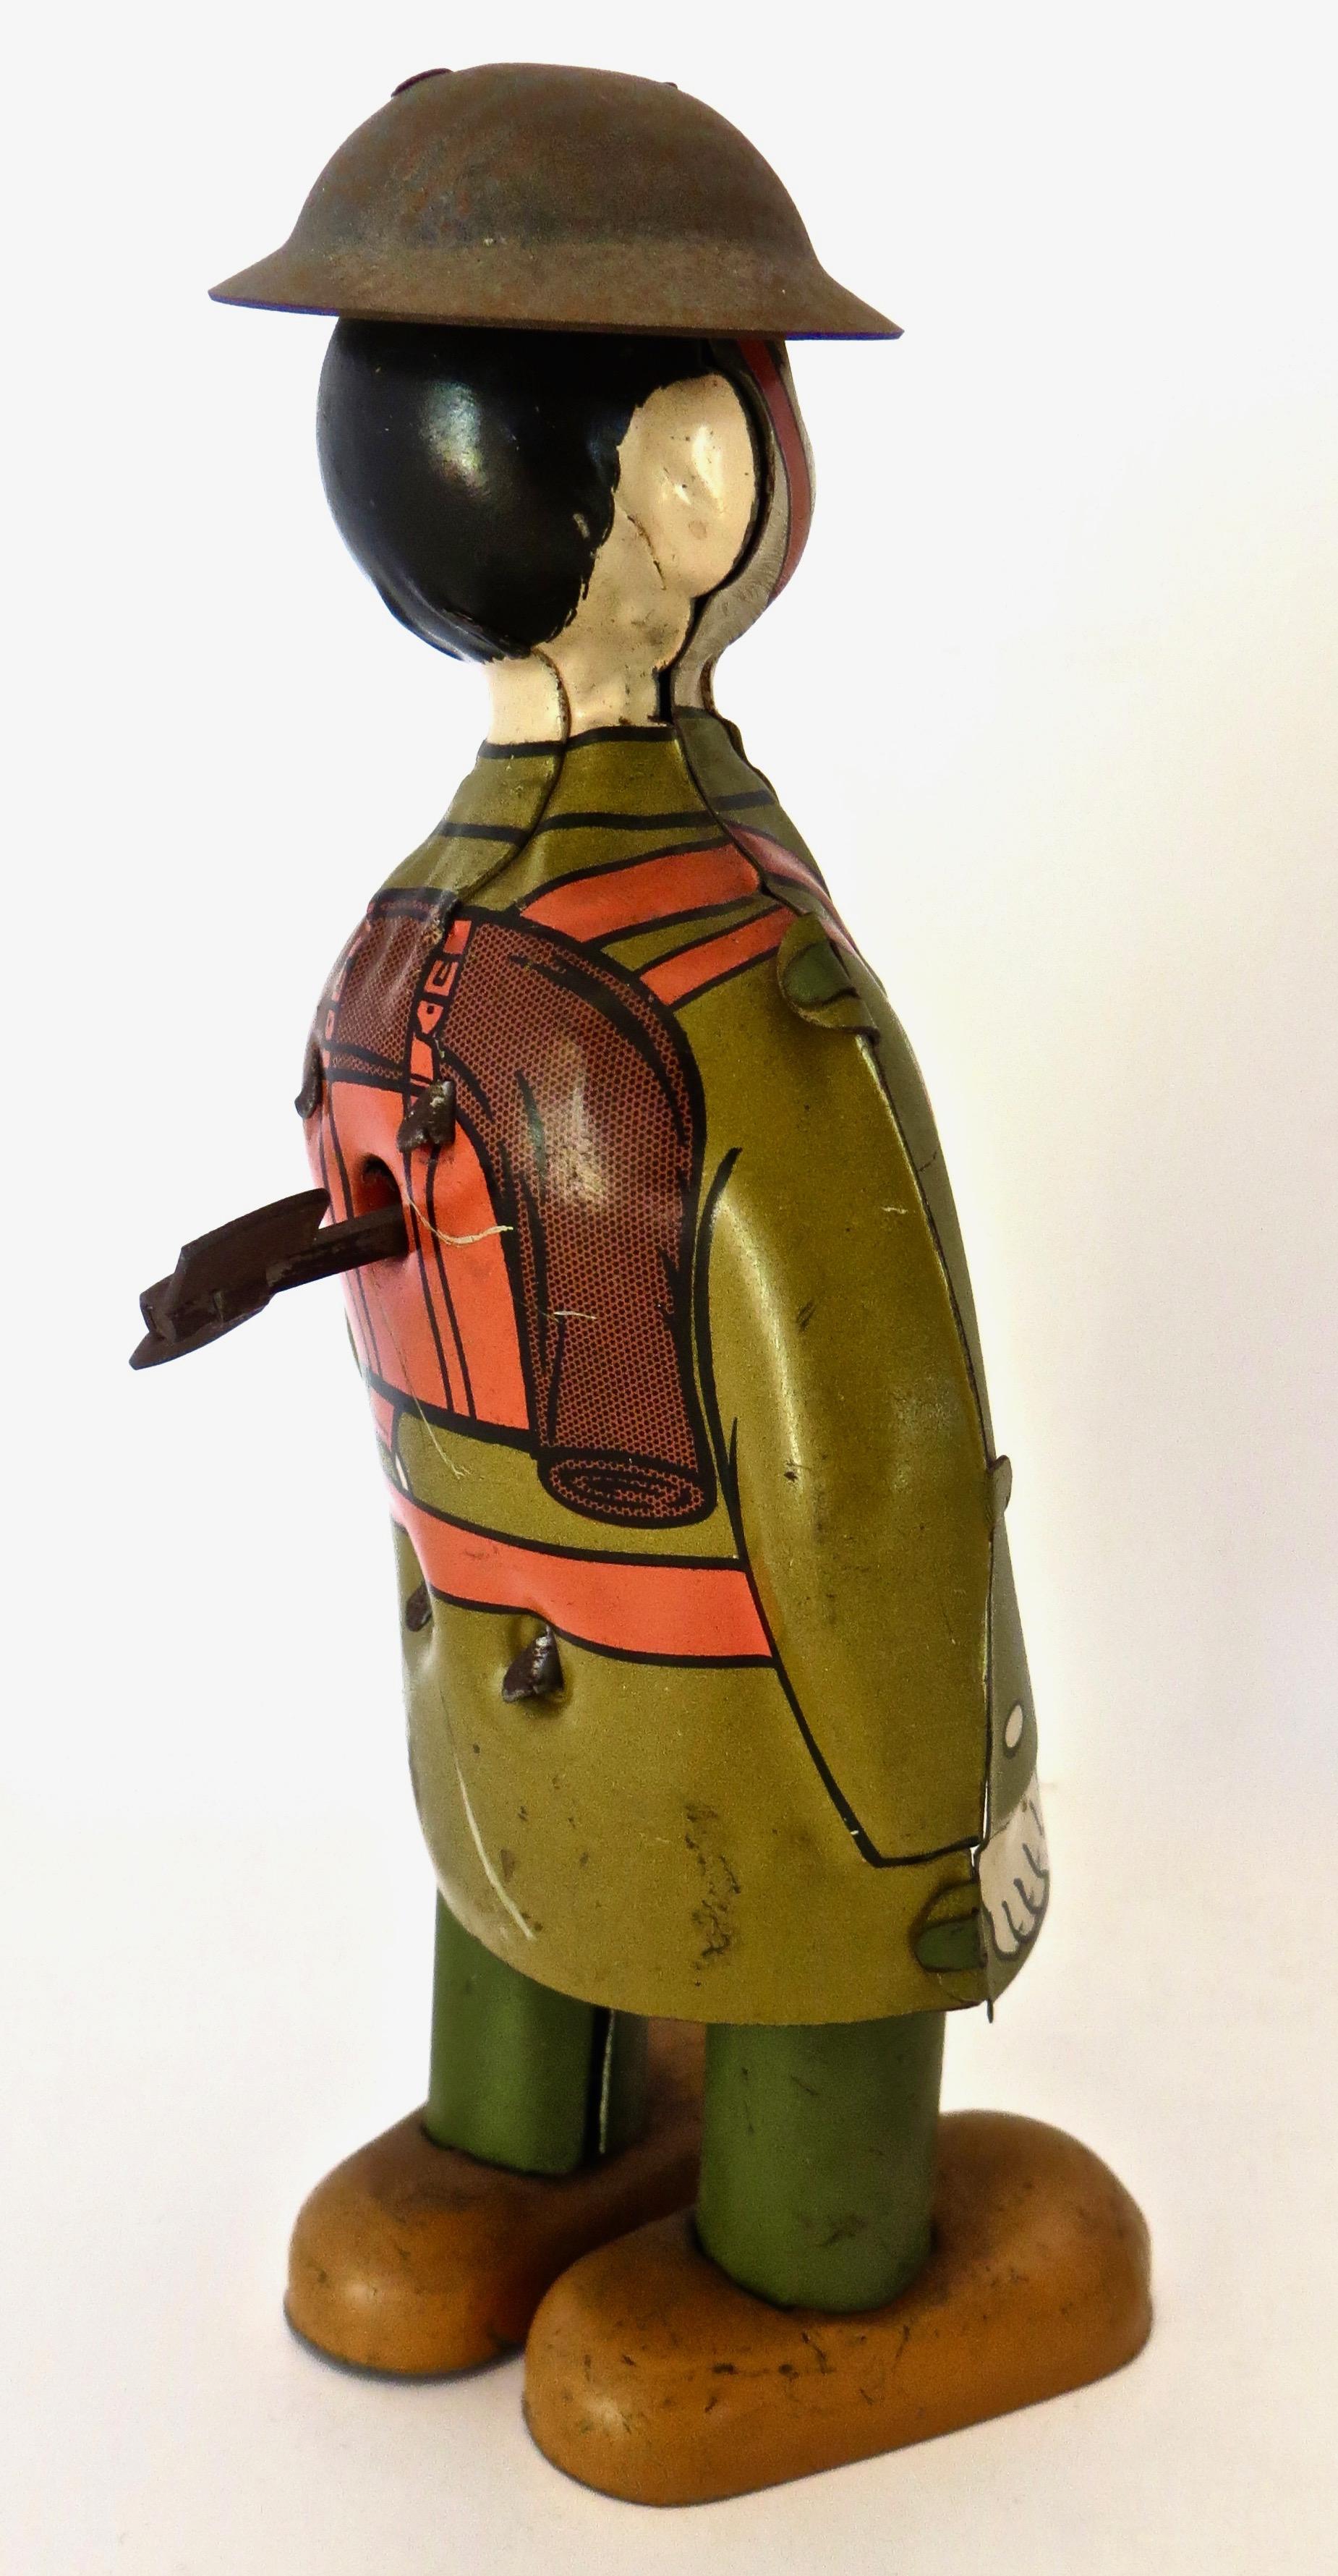 Of American manufacture, by the J. Chein Toy Company in New York City; this early 1930's vintage tin toy depicts a World War I 